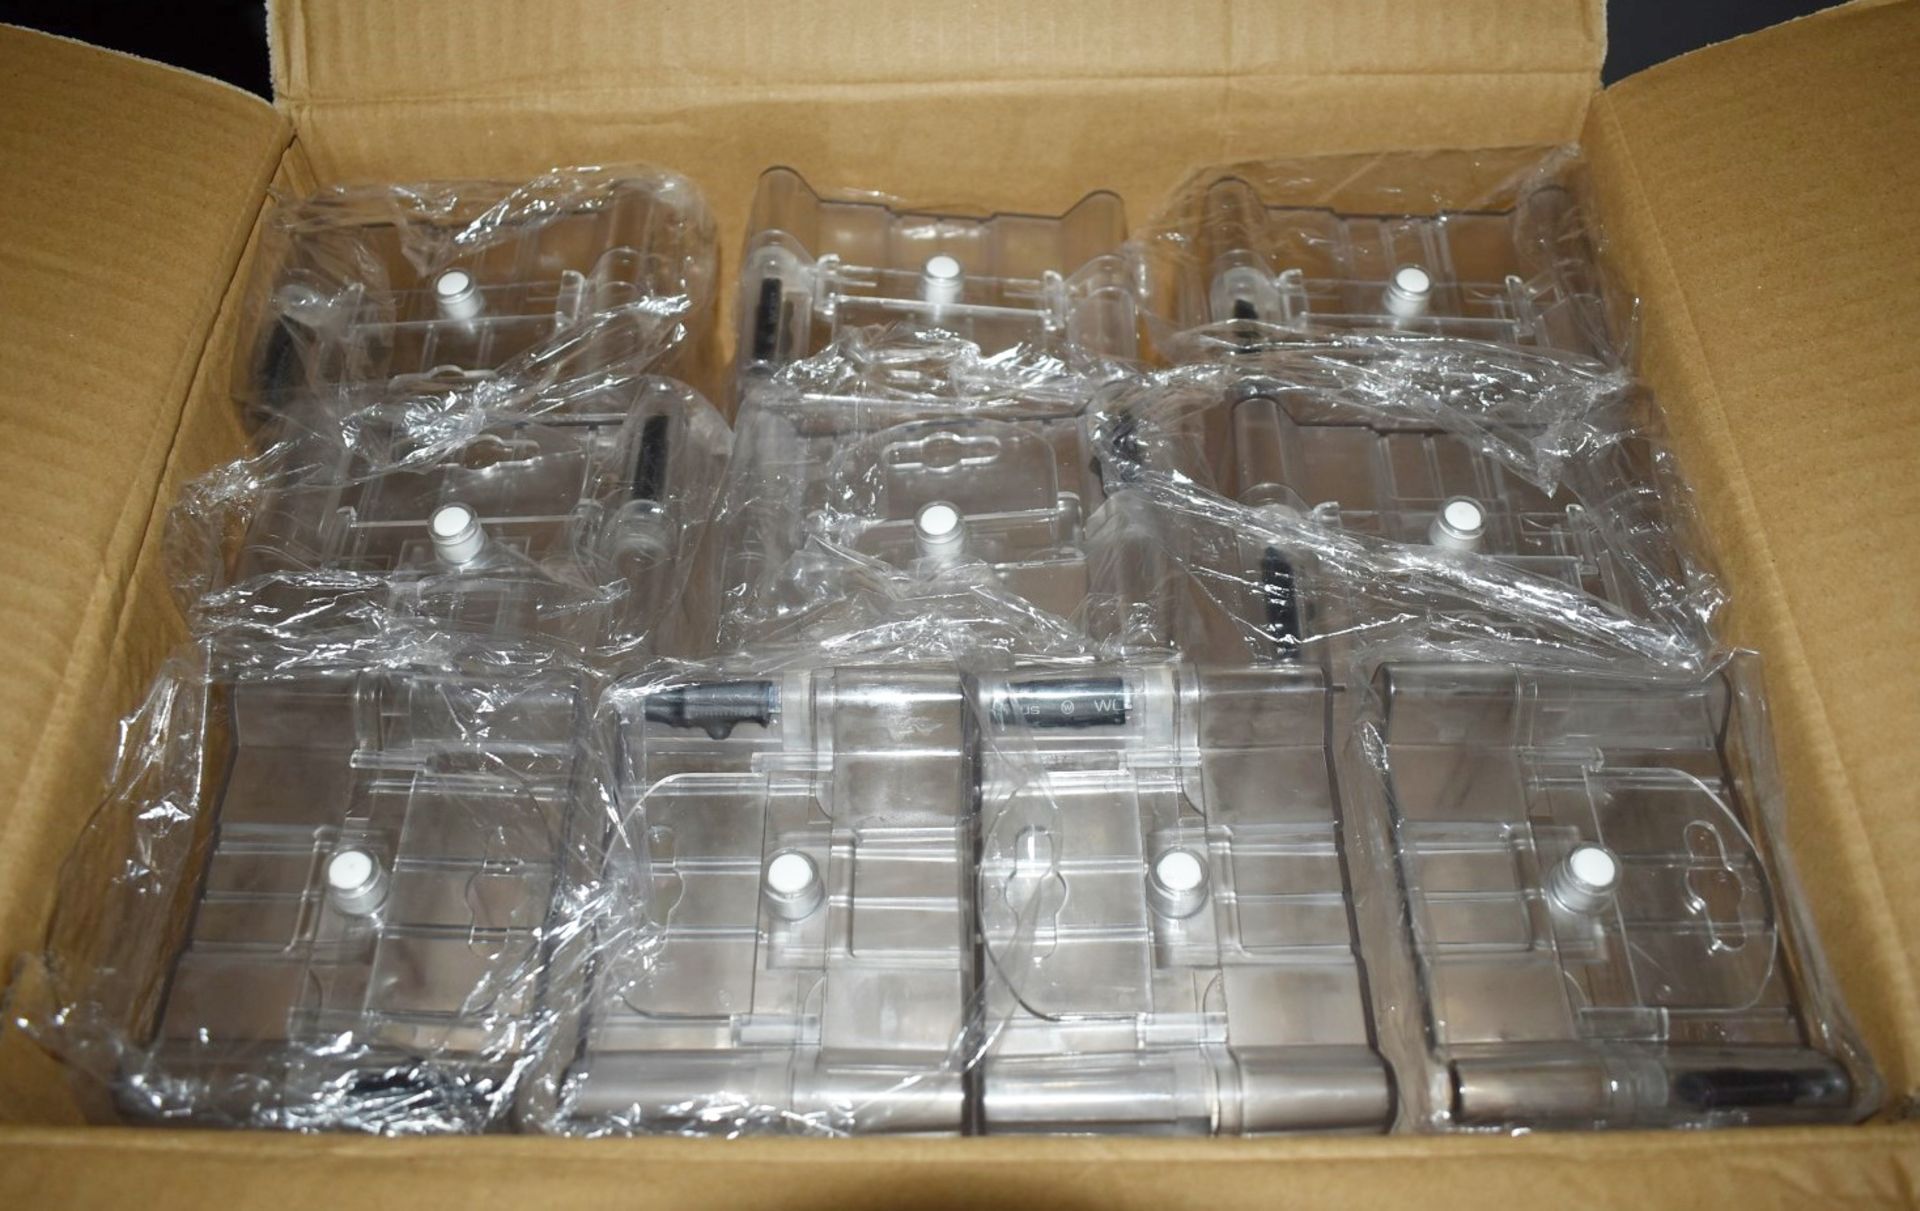 40 x Catalyst Clear Acrylic Retail Security Safer Cases With RF Tags and Hanging Tags - Brand New - Image 7 of 8